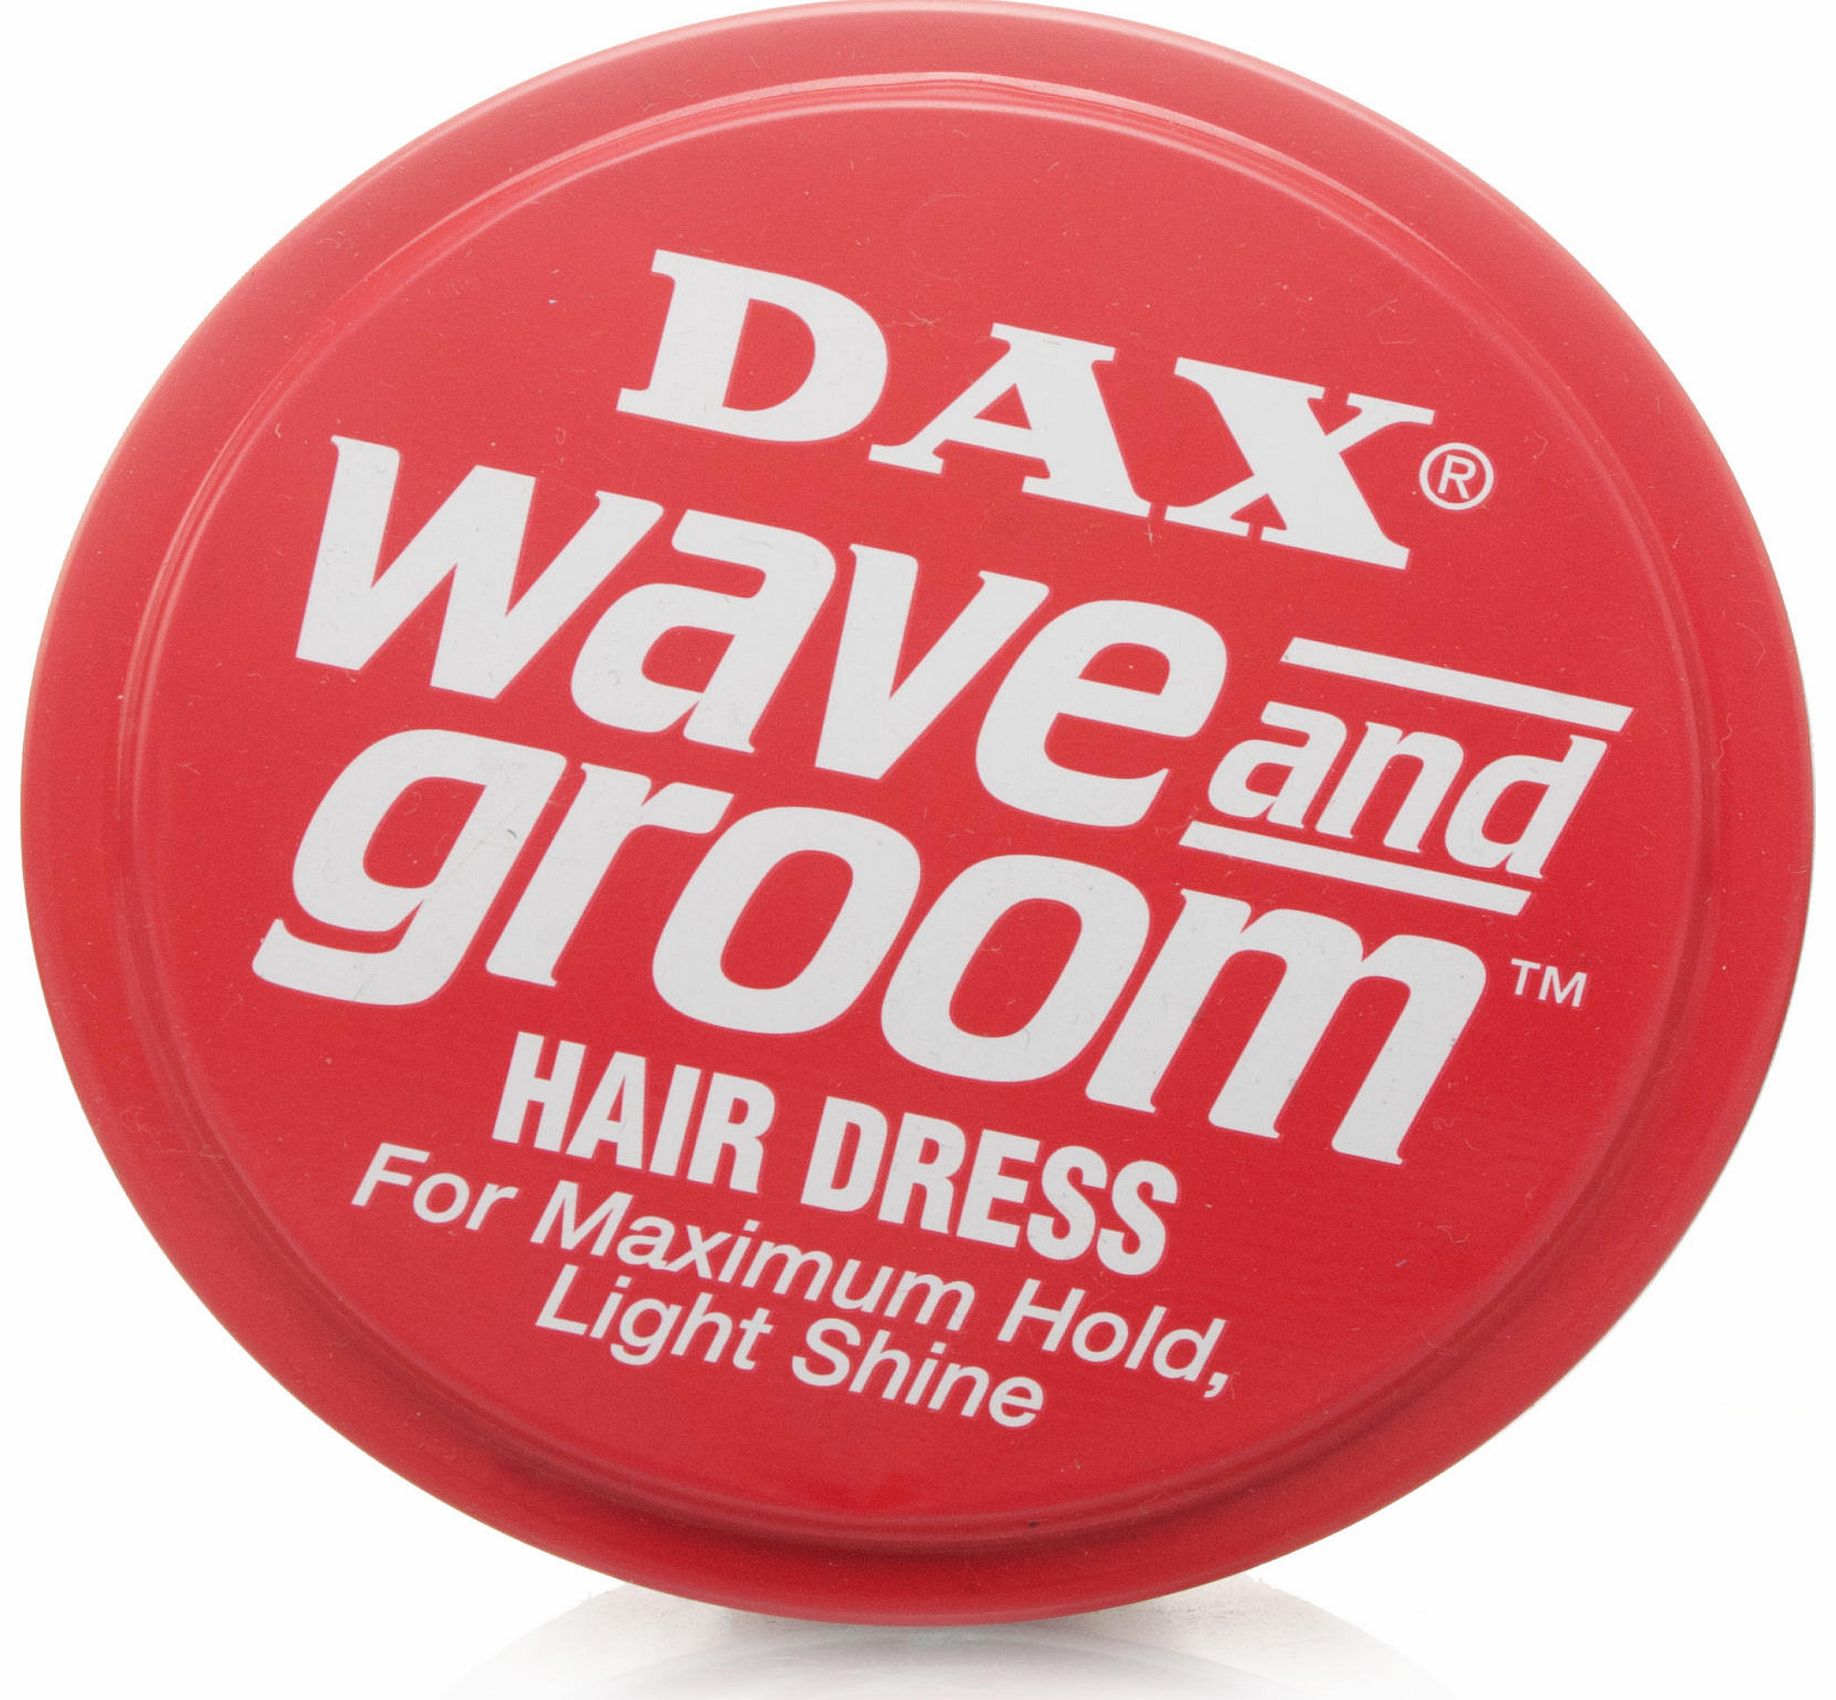 Dax Wax Red Wave And Groom